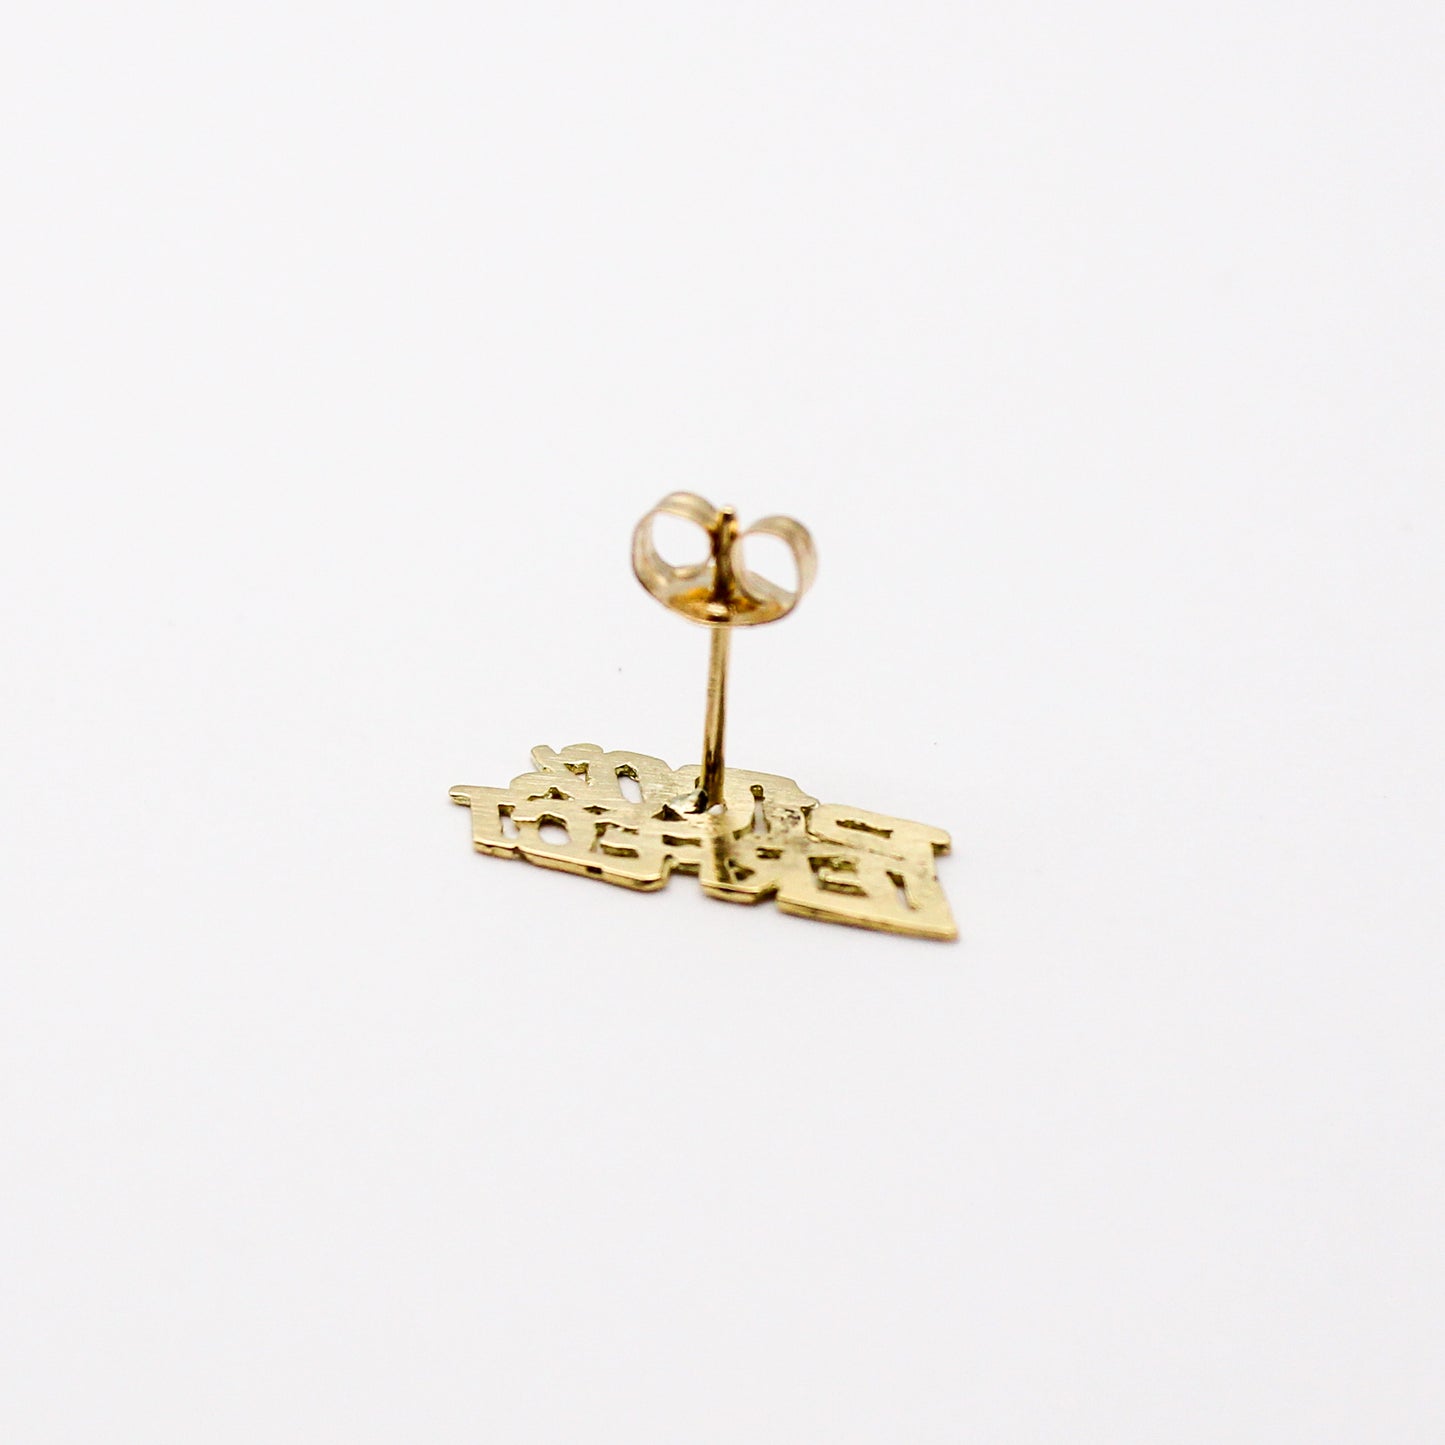 100% Perfect preloved 14kt gold stud earring